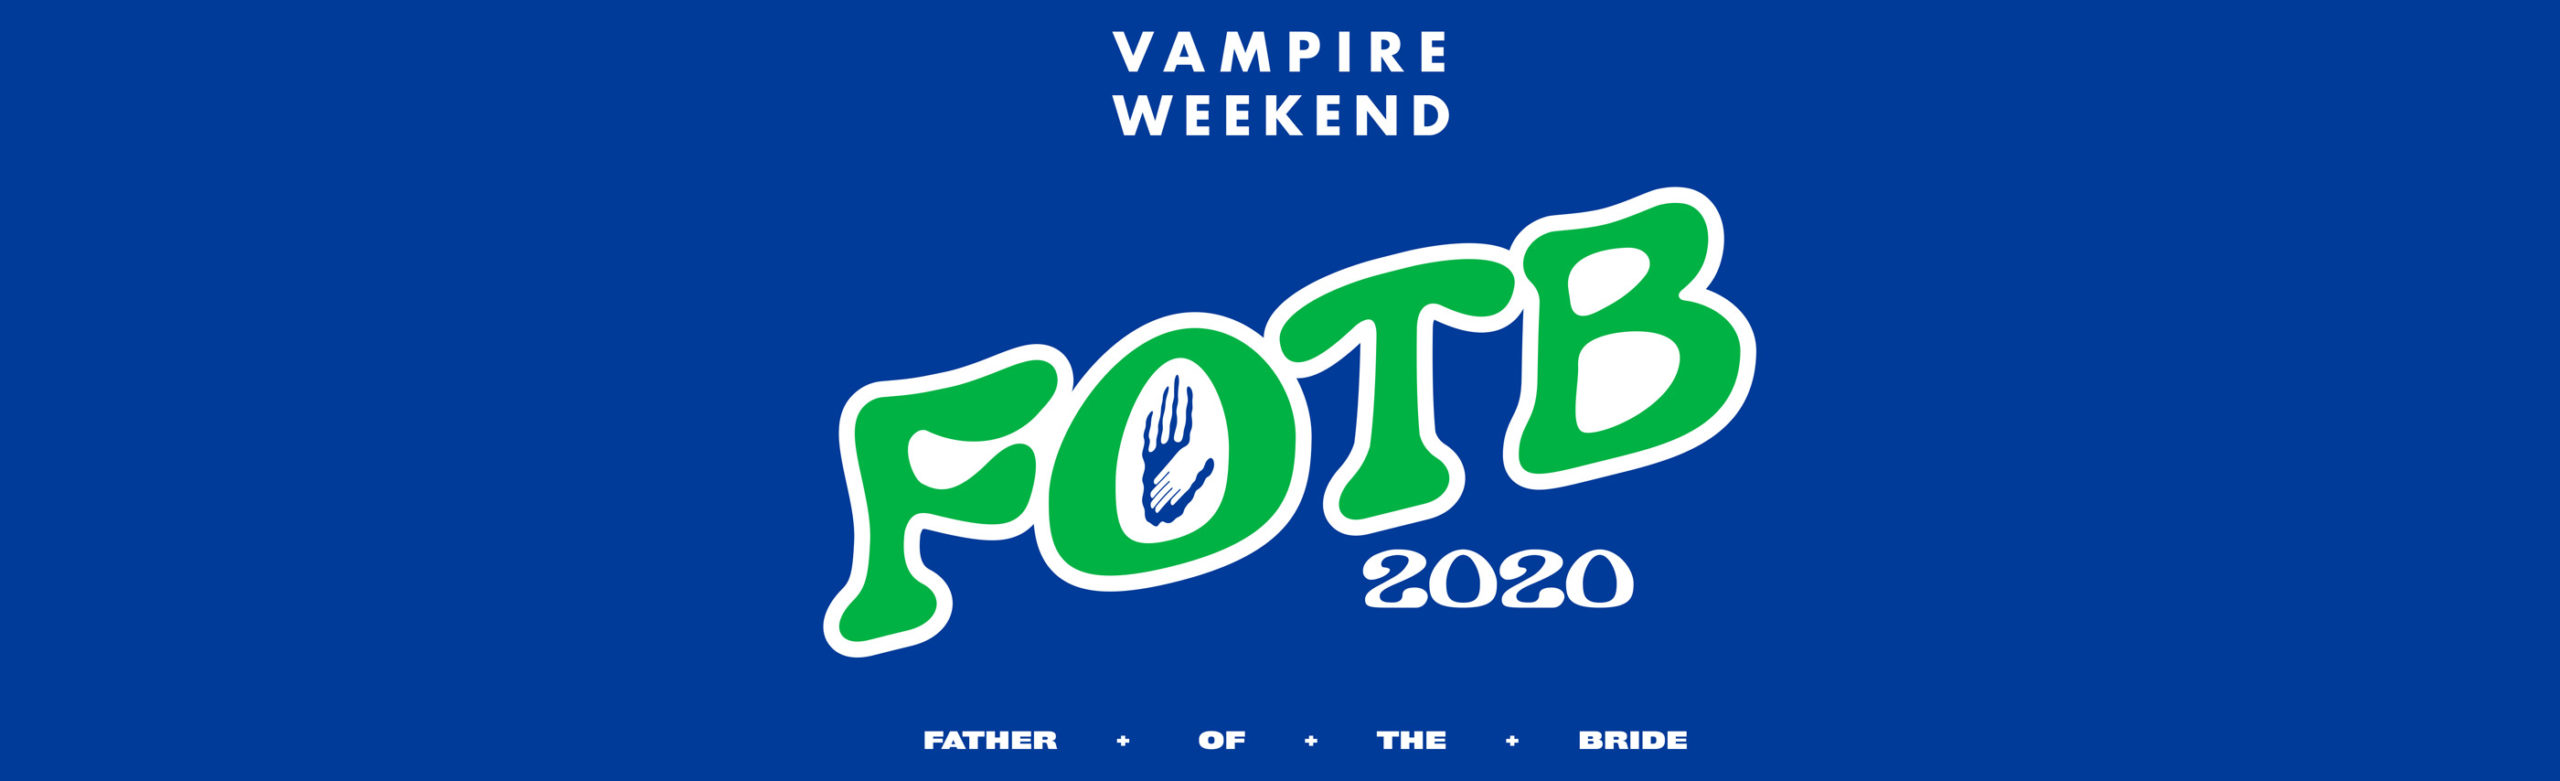 CANCELLED: Vampire Weekend